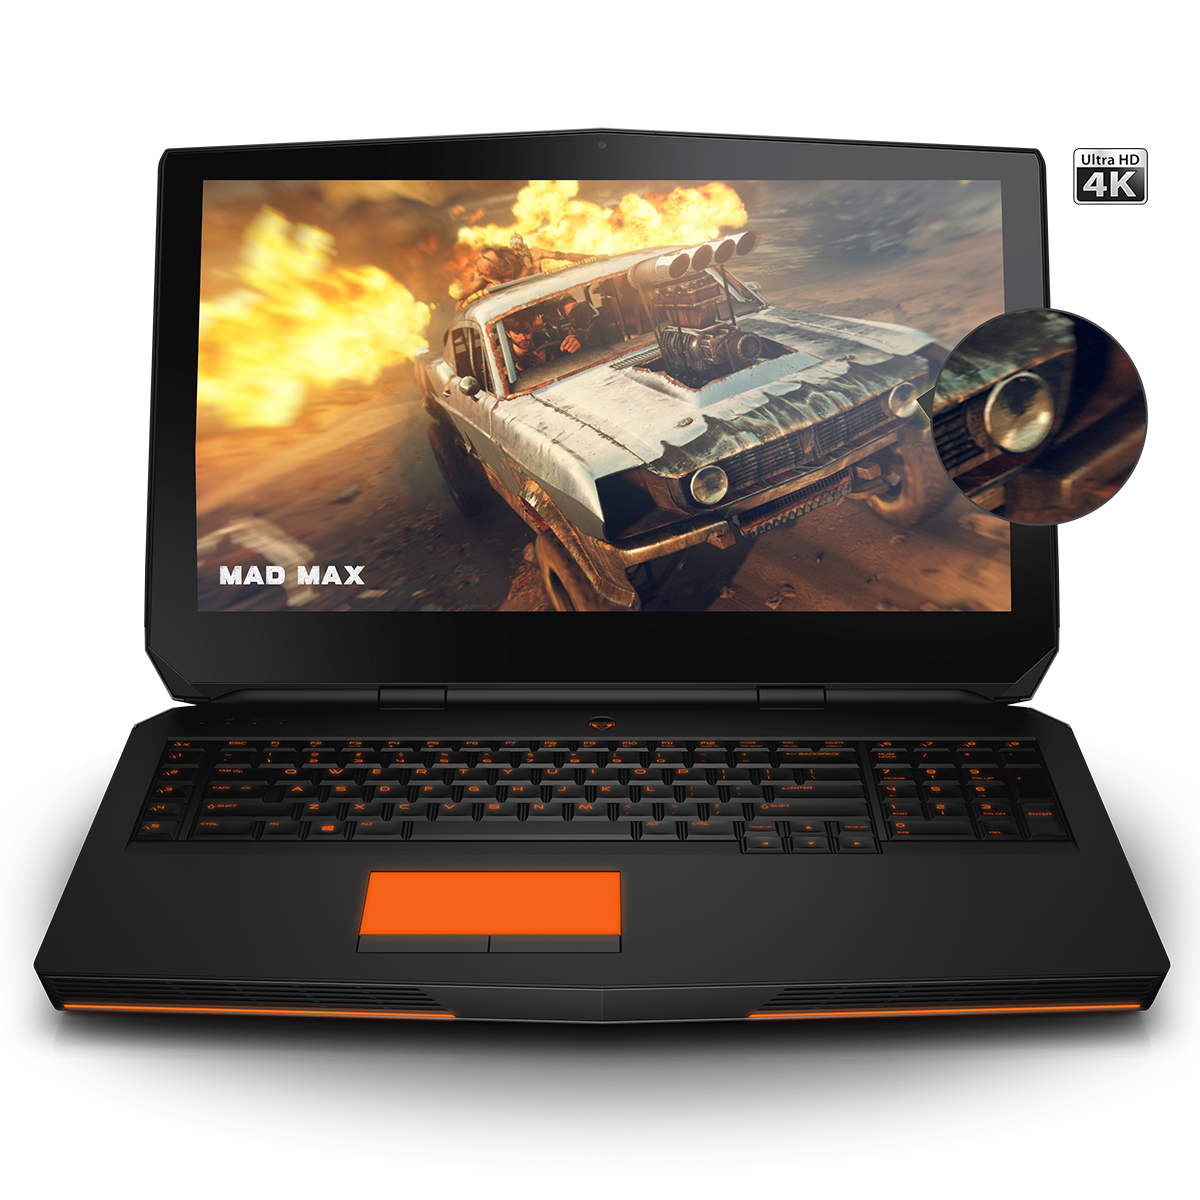 Gaming 17-inch laptop launch landing page